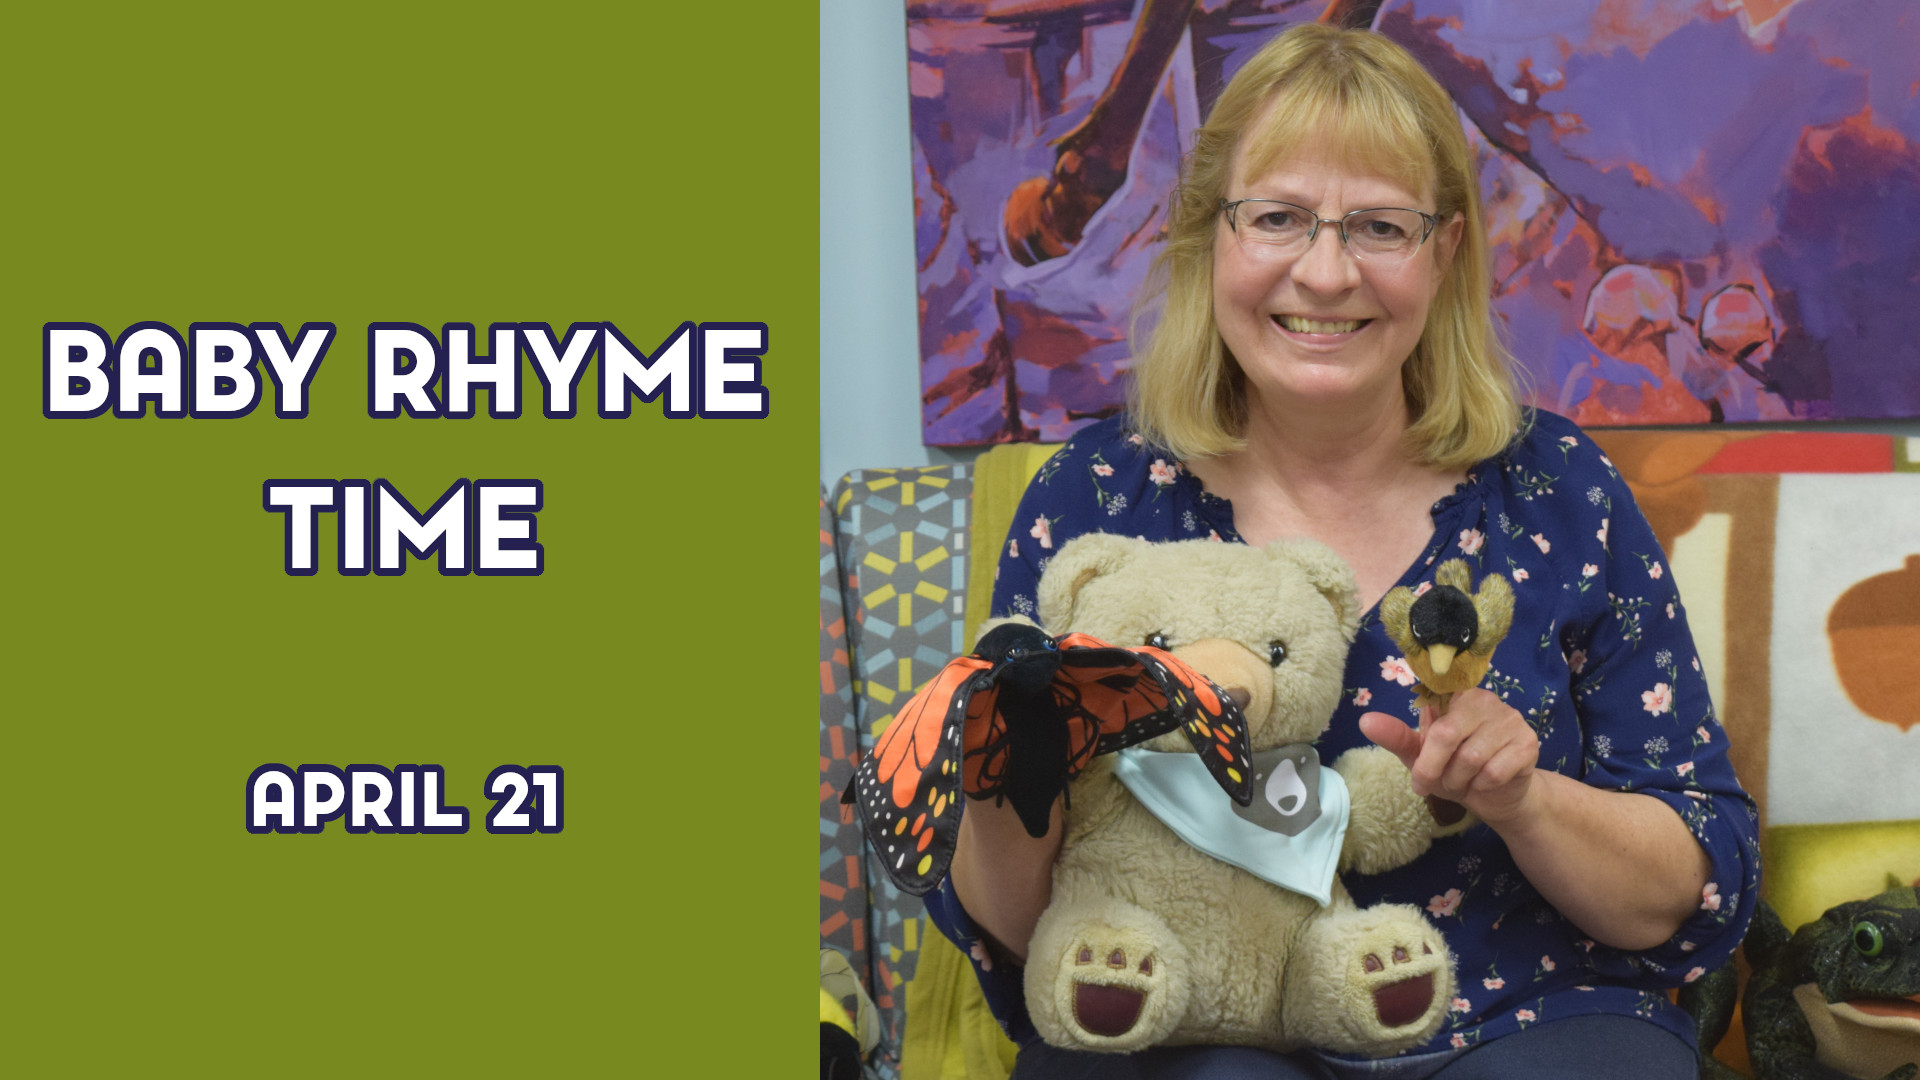 A woman holds some stuffed animals next to the text "Baby Rhyme Time April 21"